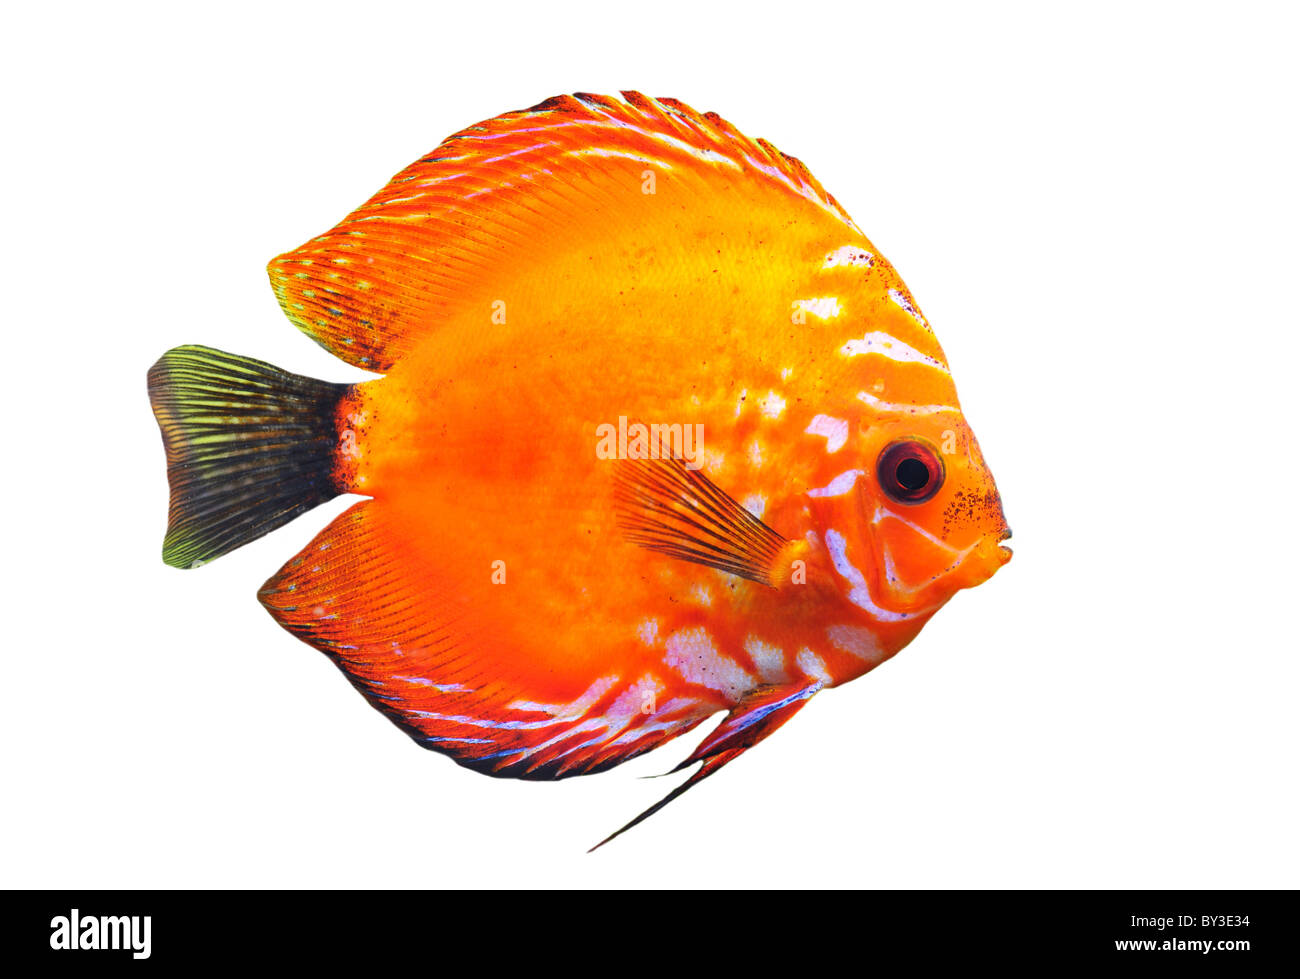 portrait of a red tropical Symphysodon discus fish on a white background Stock Photo